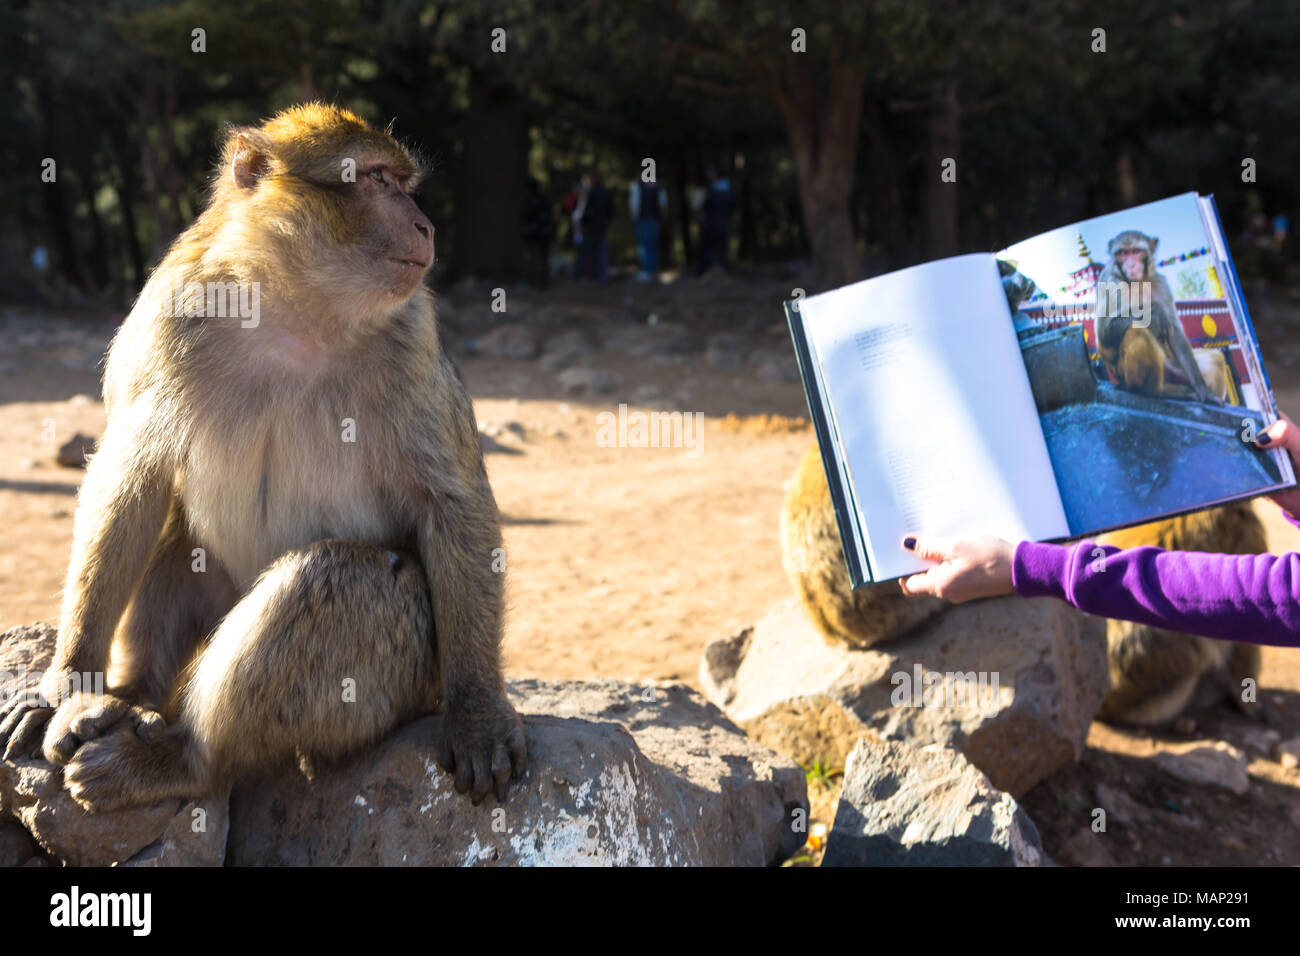 Monkey in Morocco looking at a book with the image of another monkey. Stock Photo